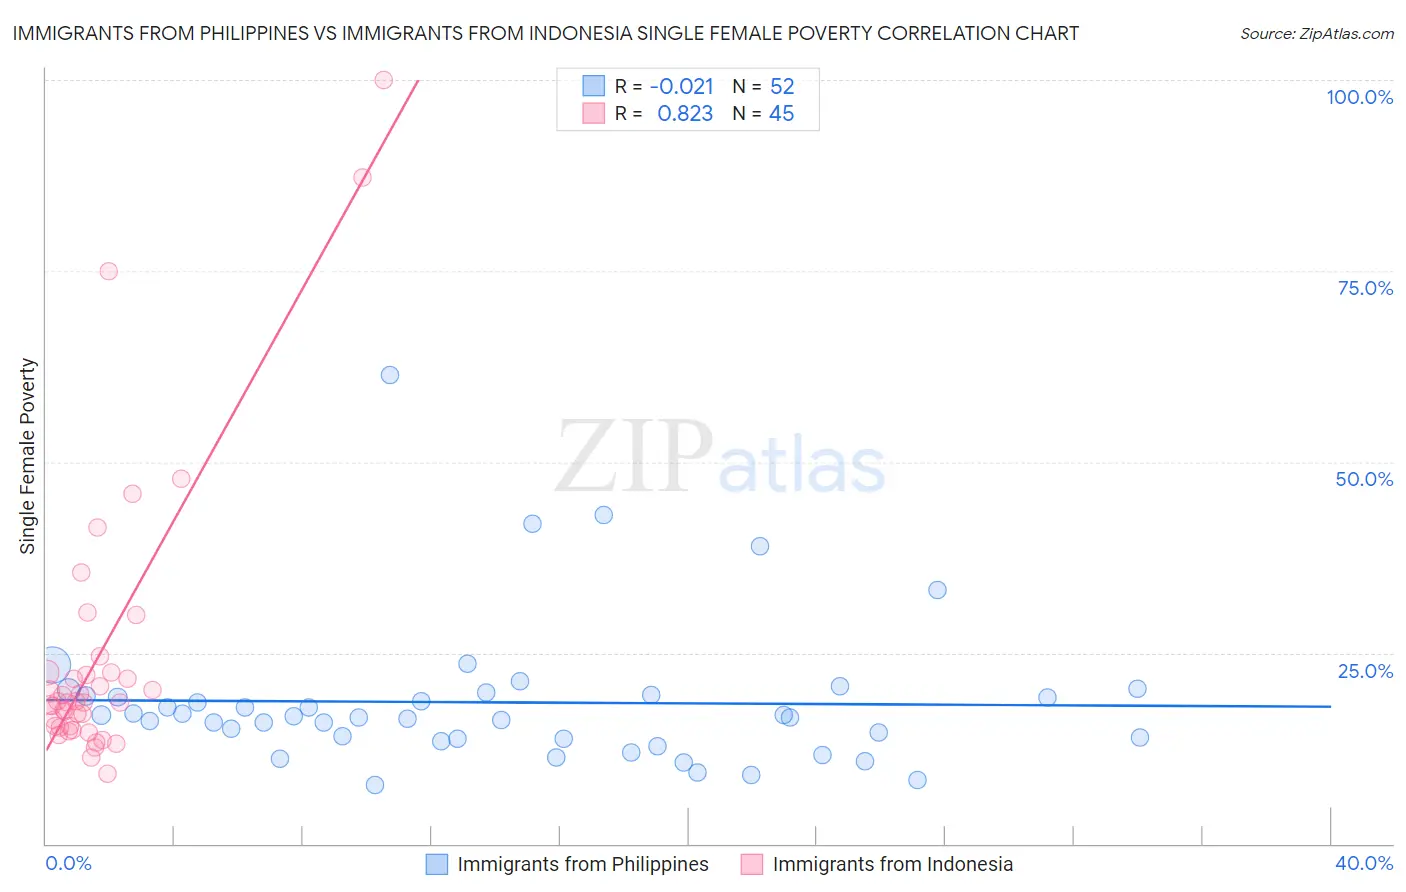 Immigrants from Philippines vs Immigrants from Indonesia Single Female Poverty